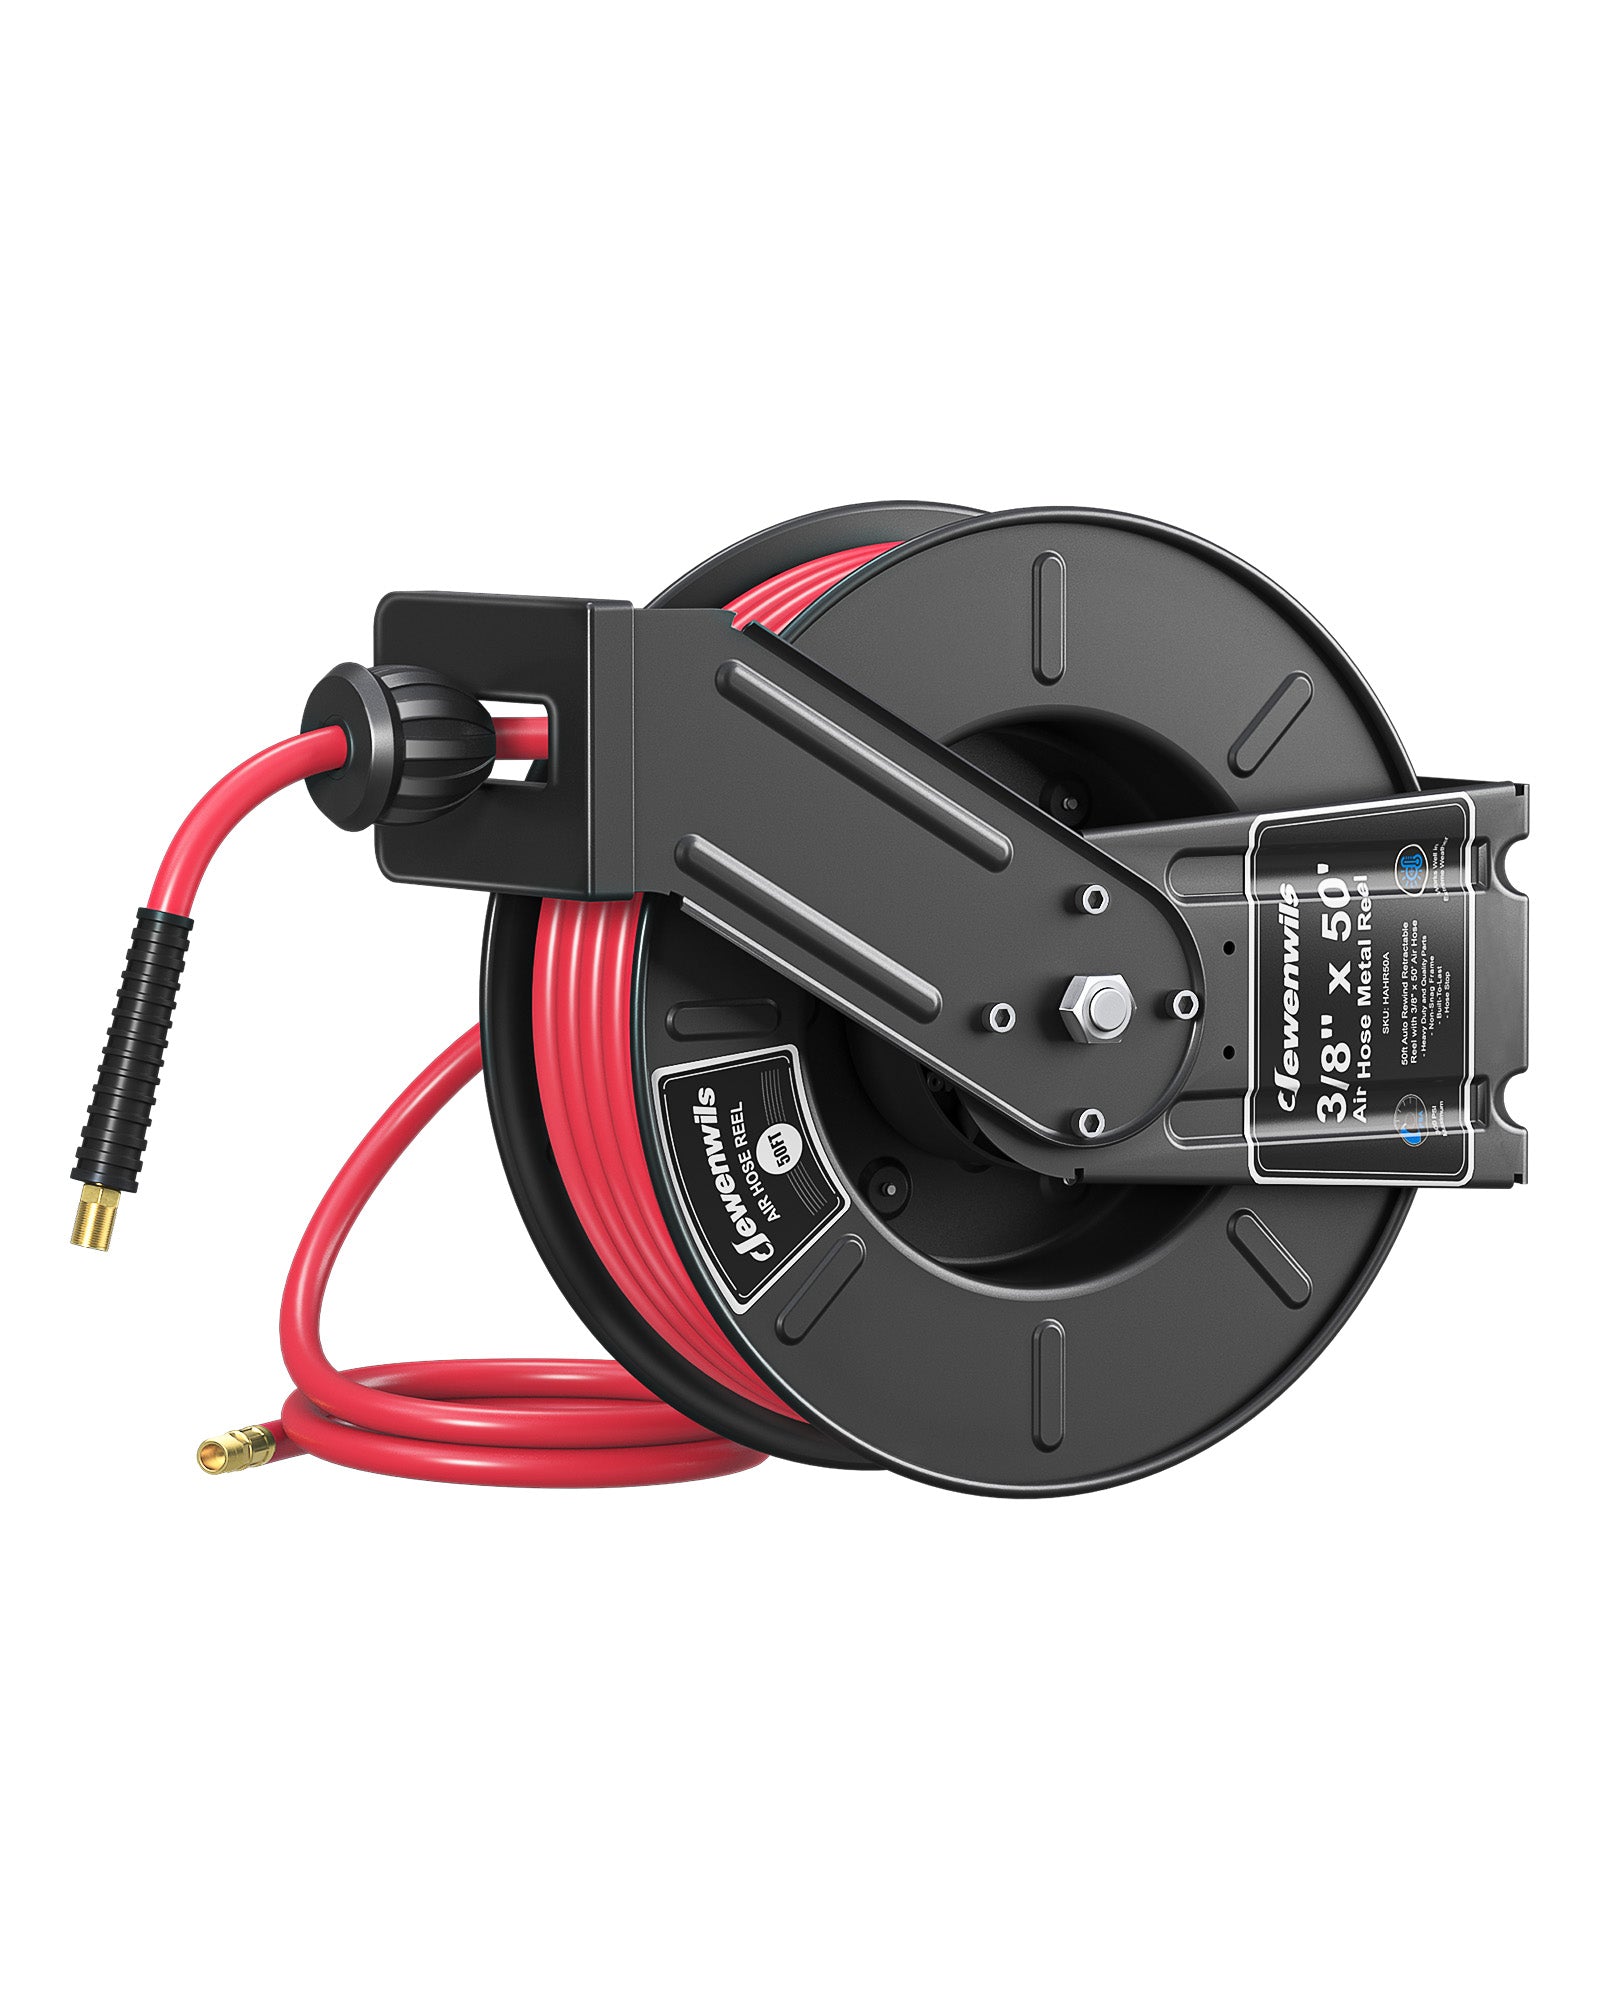 Auto Retracted Air Hose Reel Manufacturers & Suppliers - China